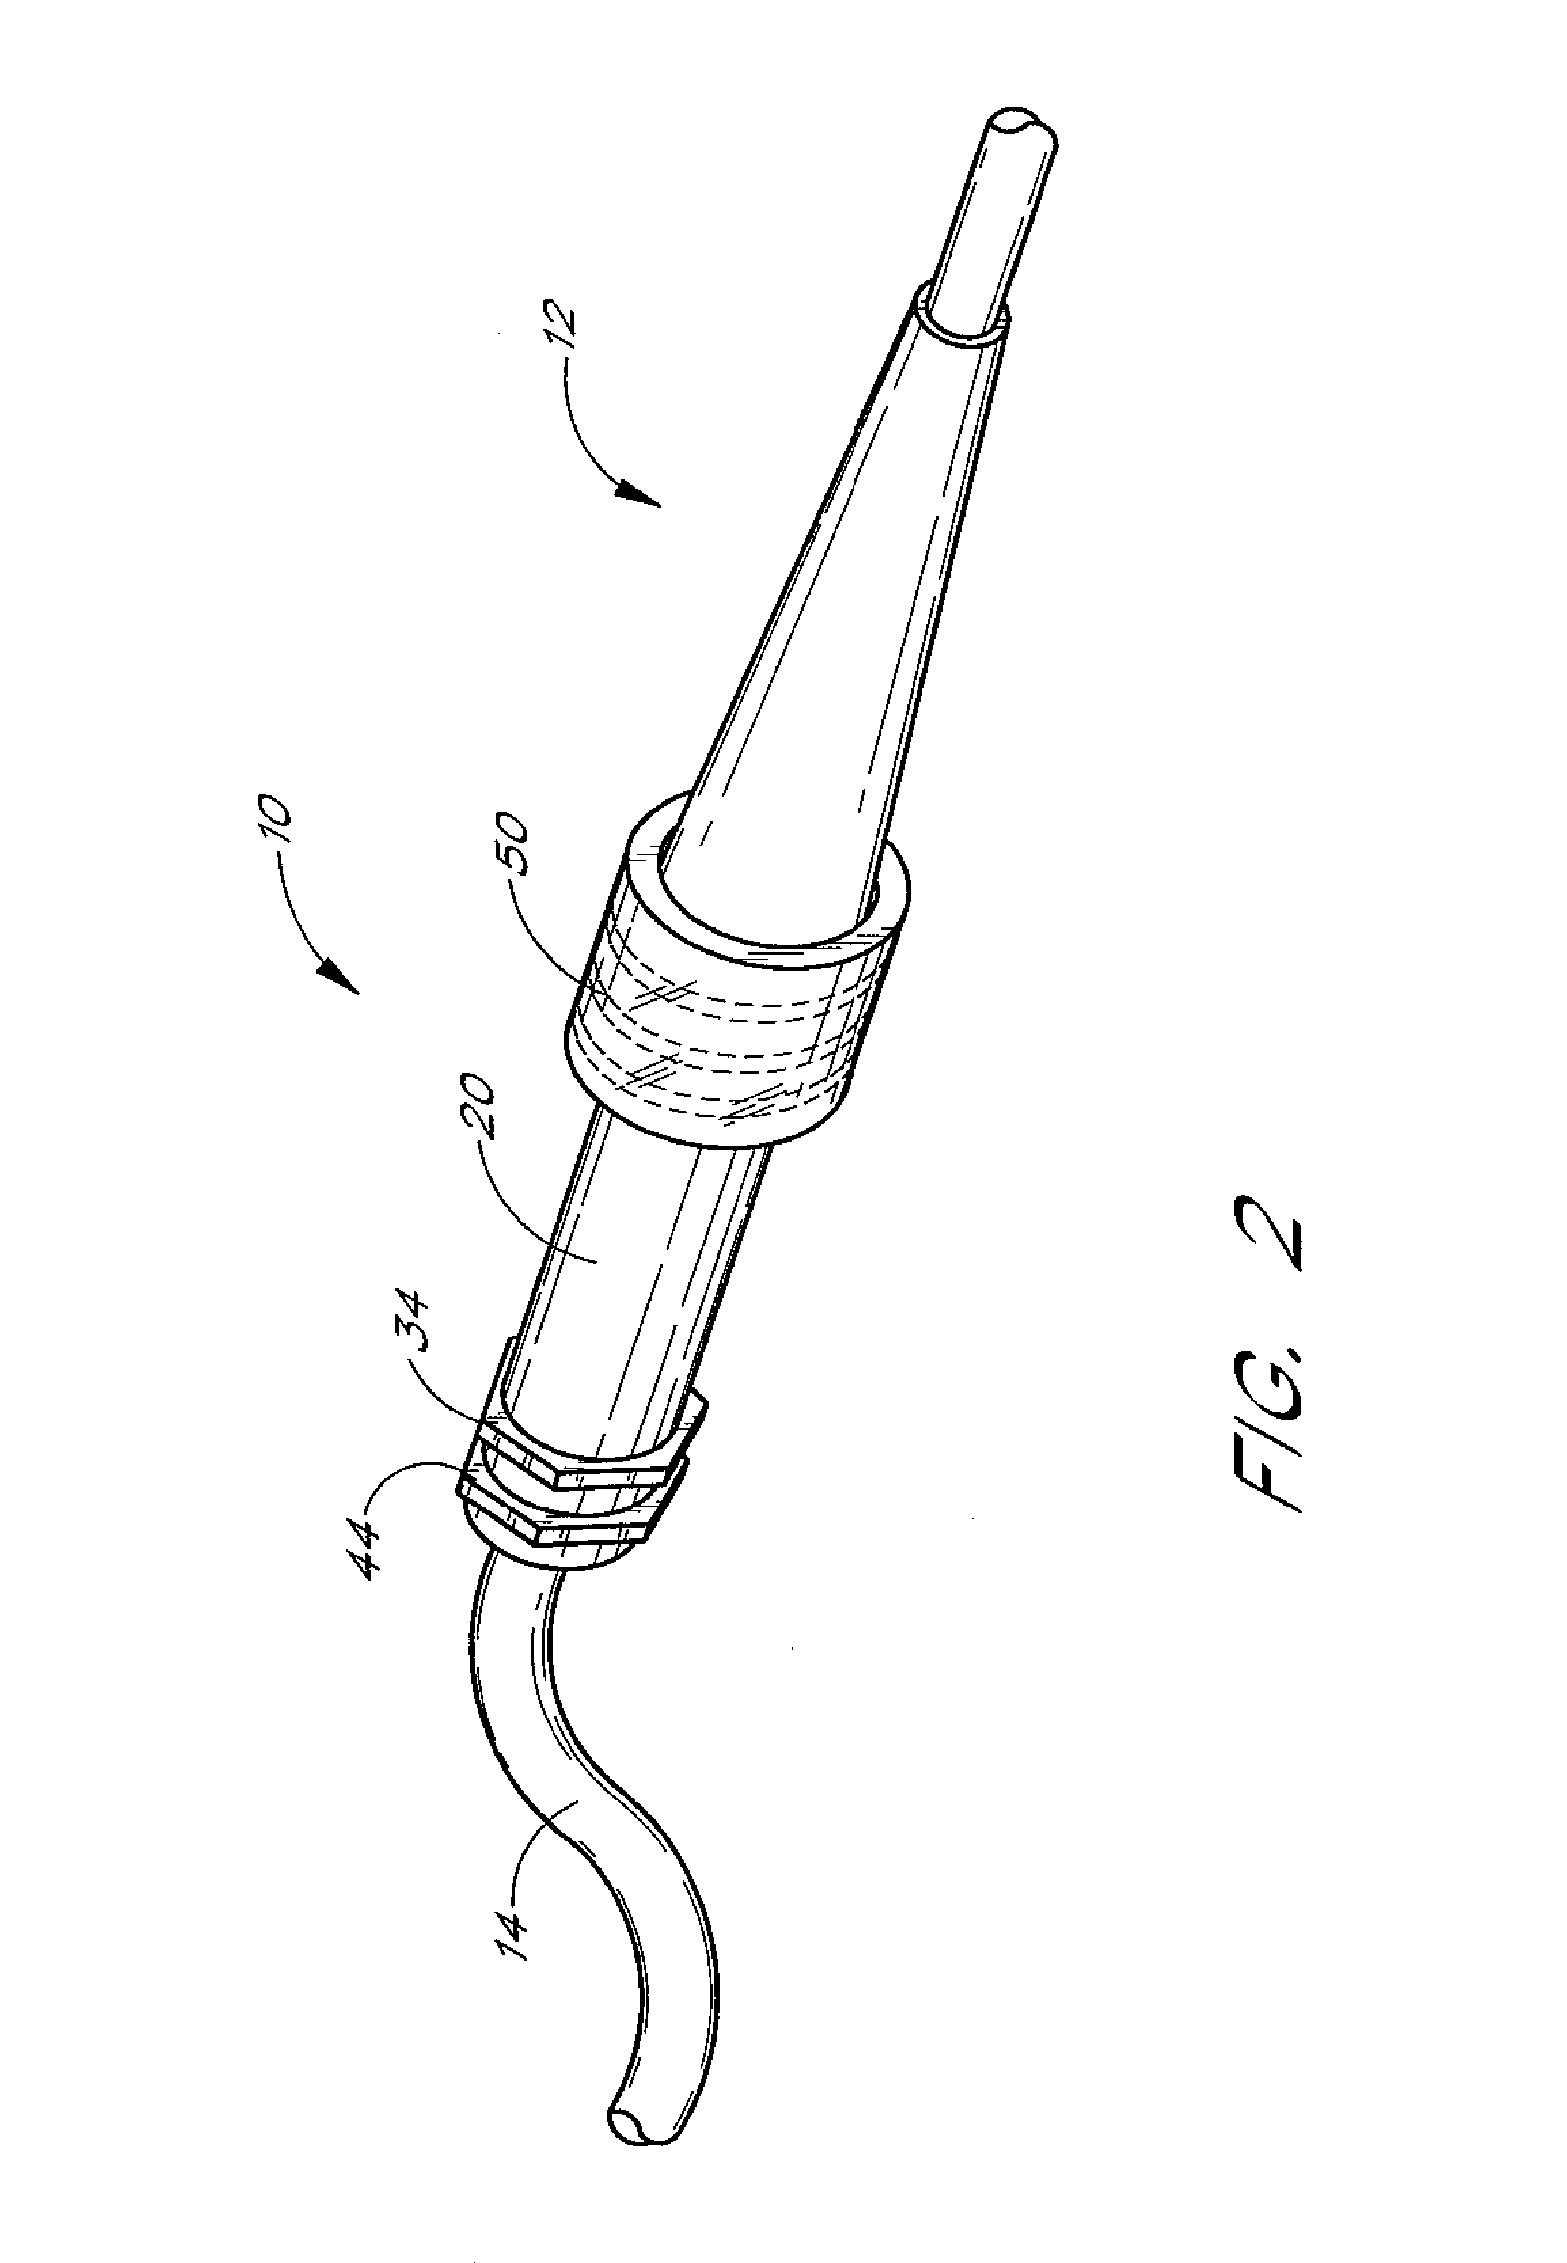 Medical device connector fitting